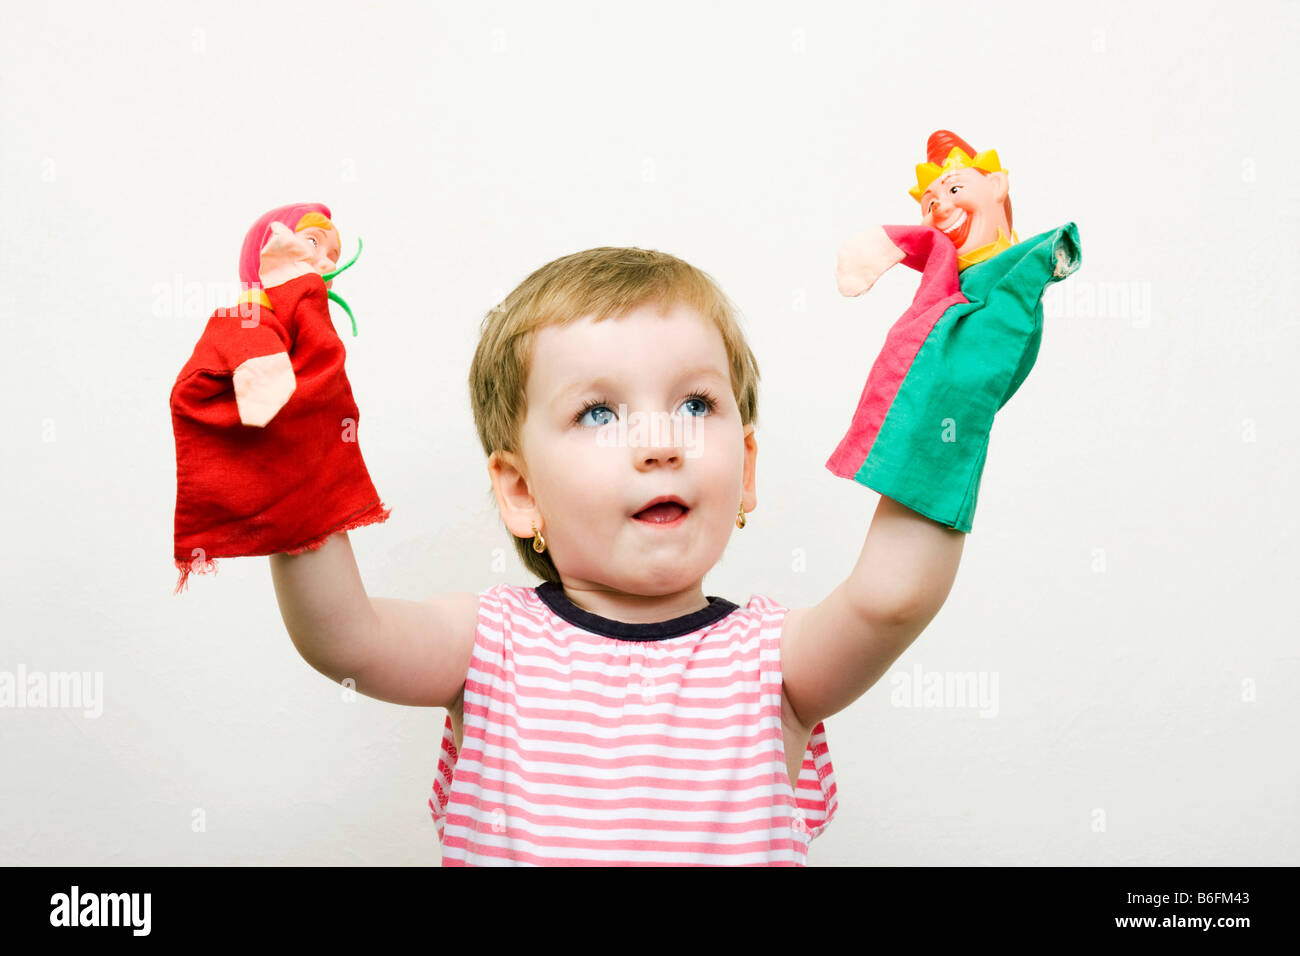 Little girl, 3 years, with two puppets Stock Photo